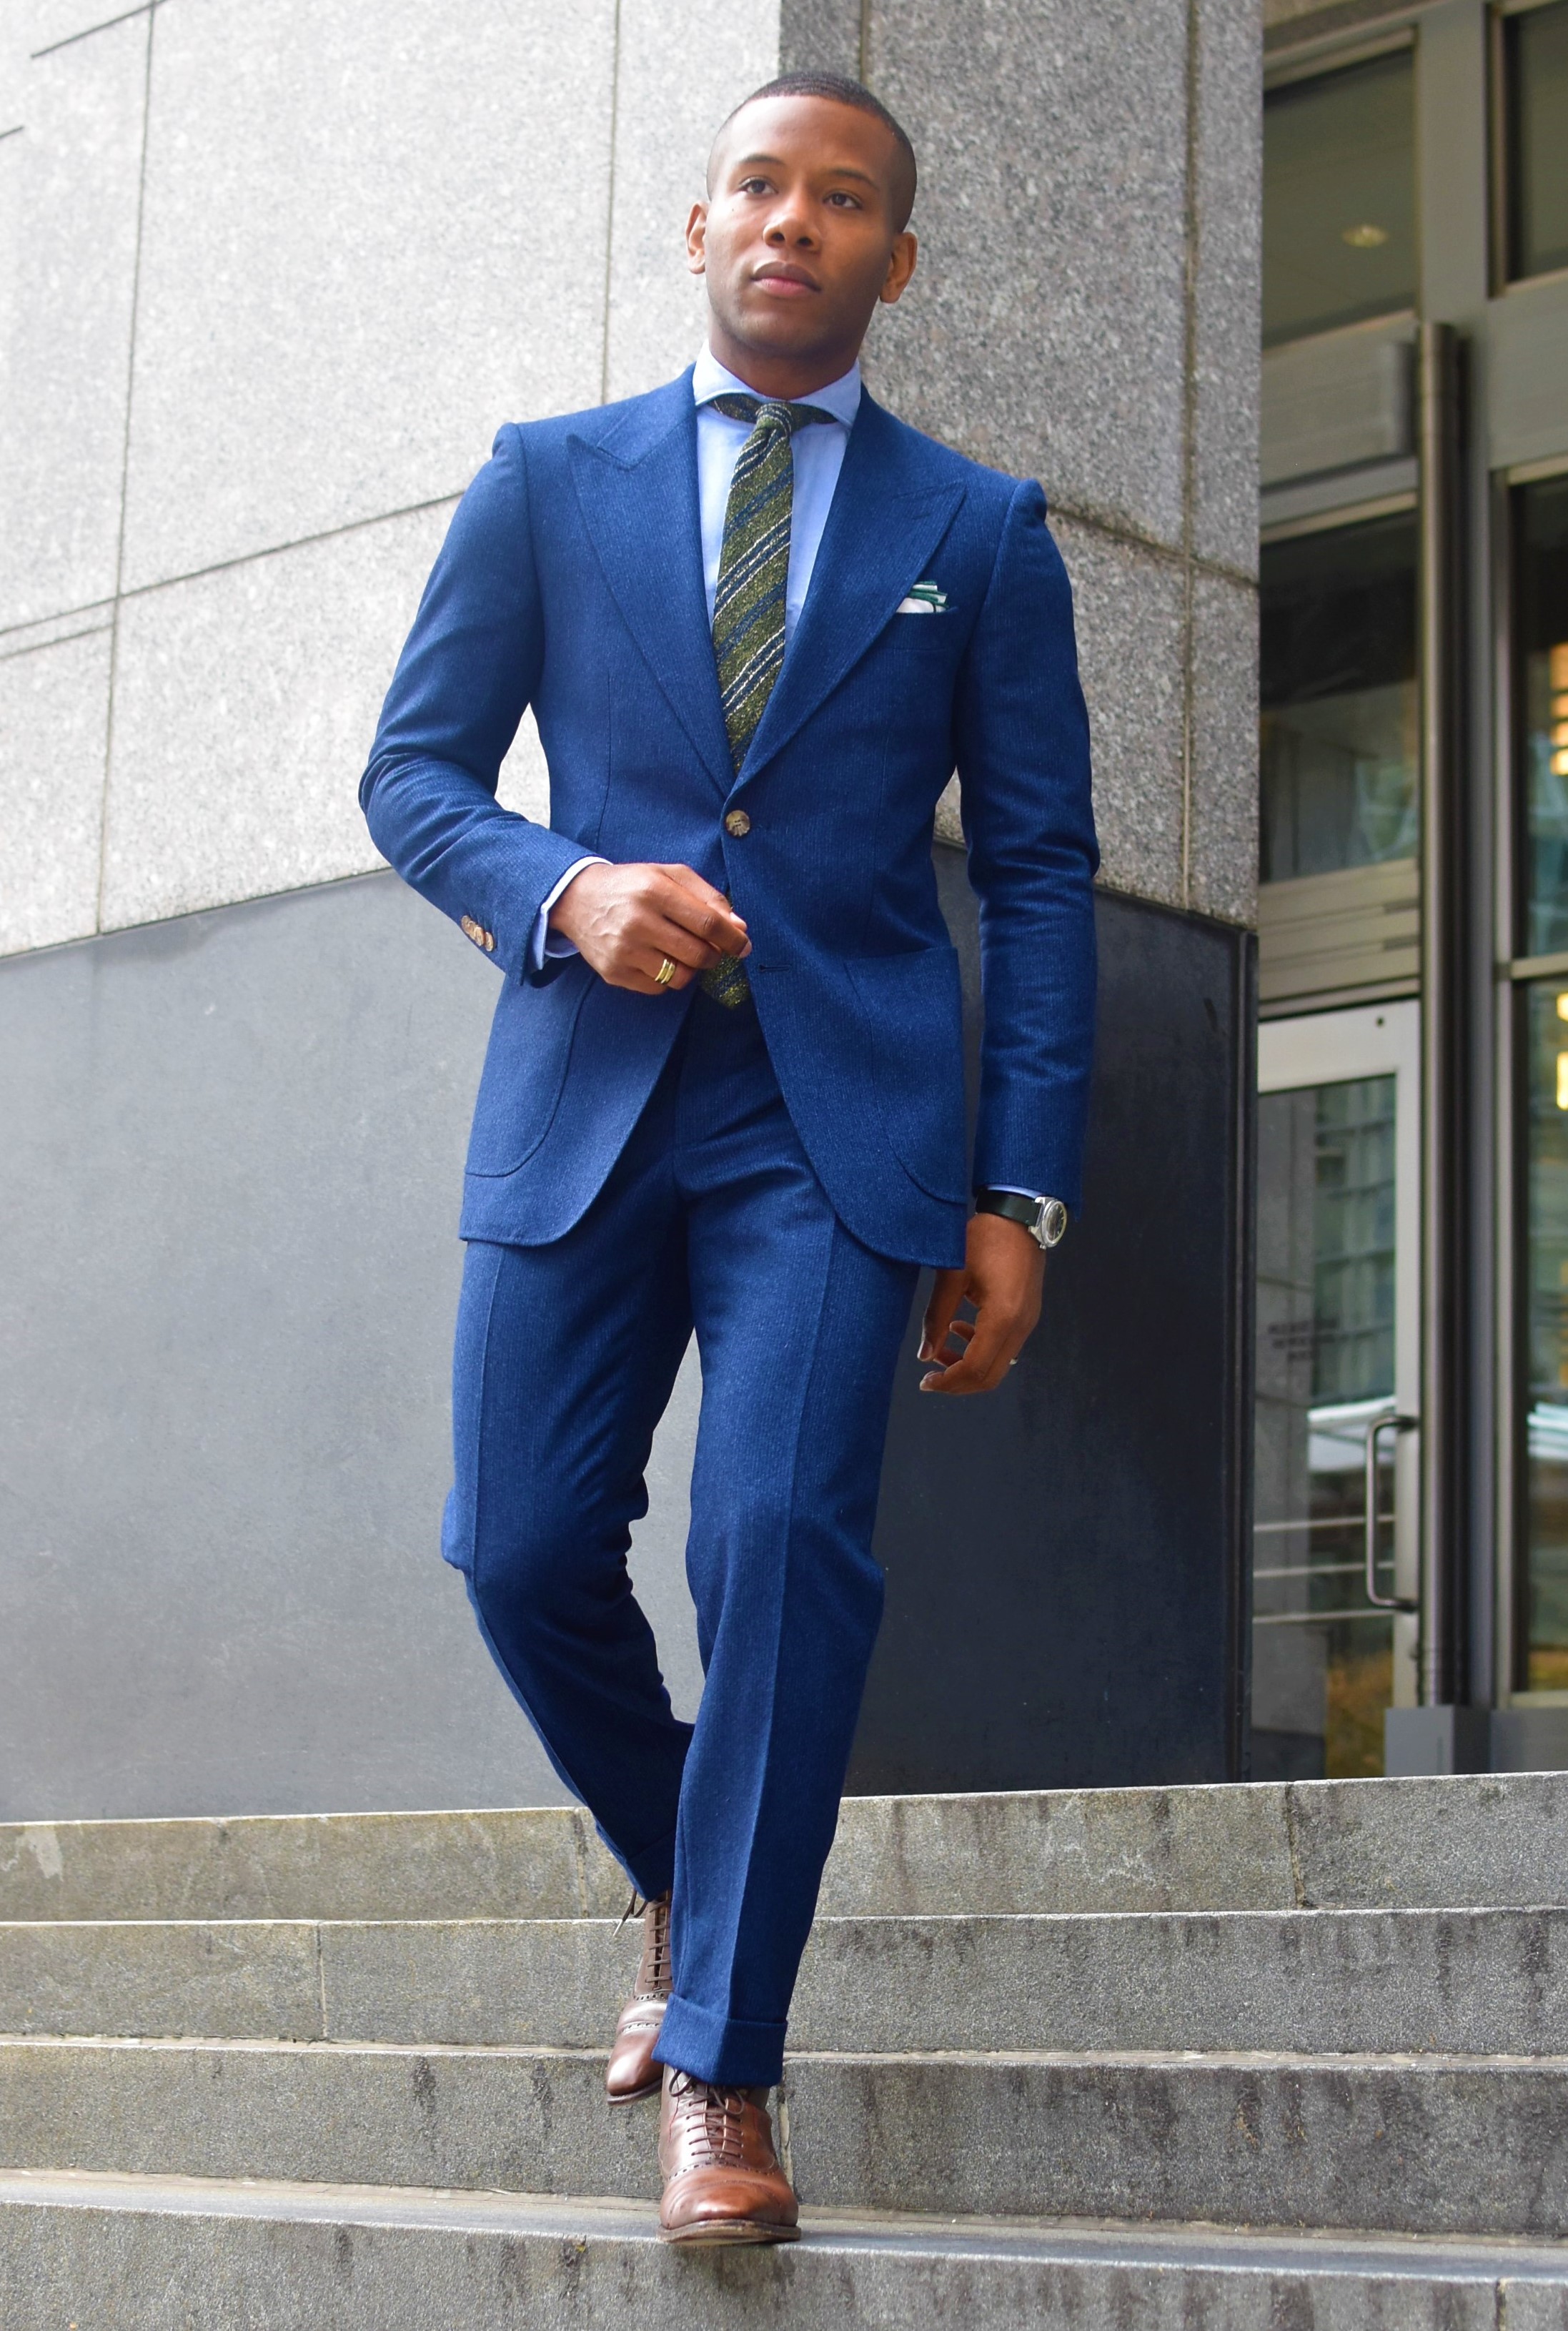 Look The Part & Upgrade Your Suit Style – Men’s Style Pro | Men’s Style ...